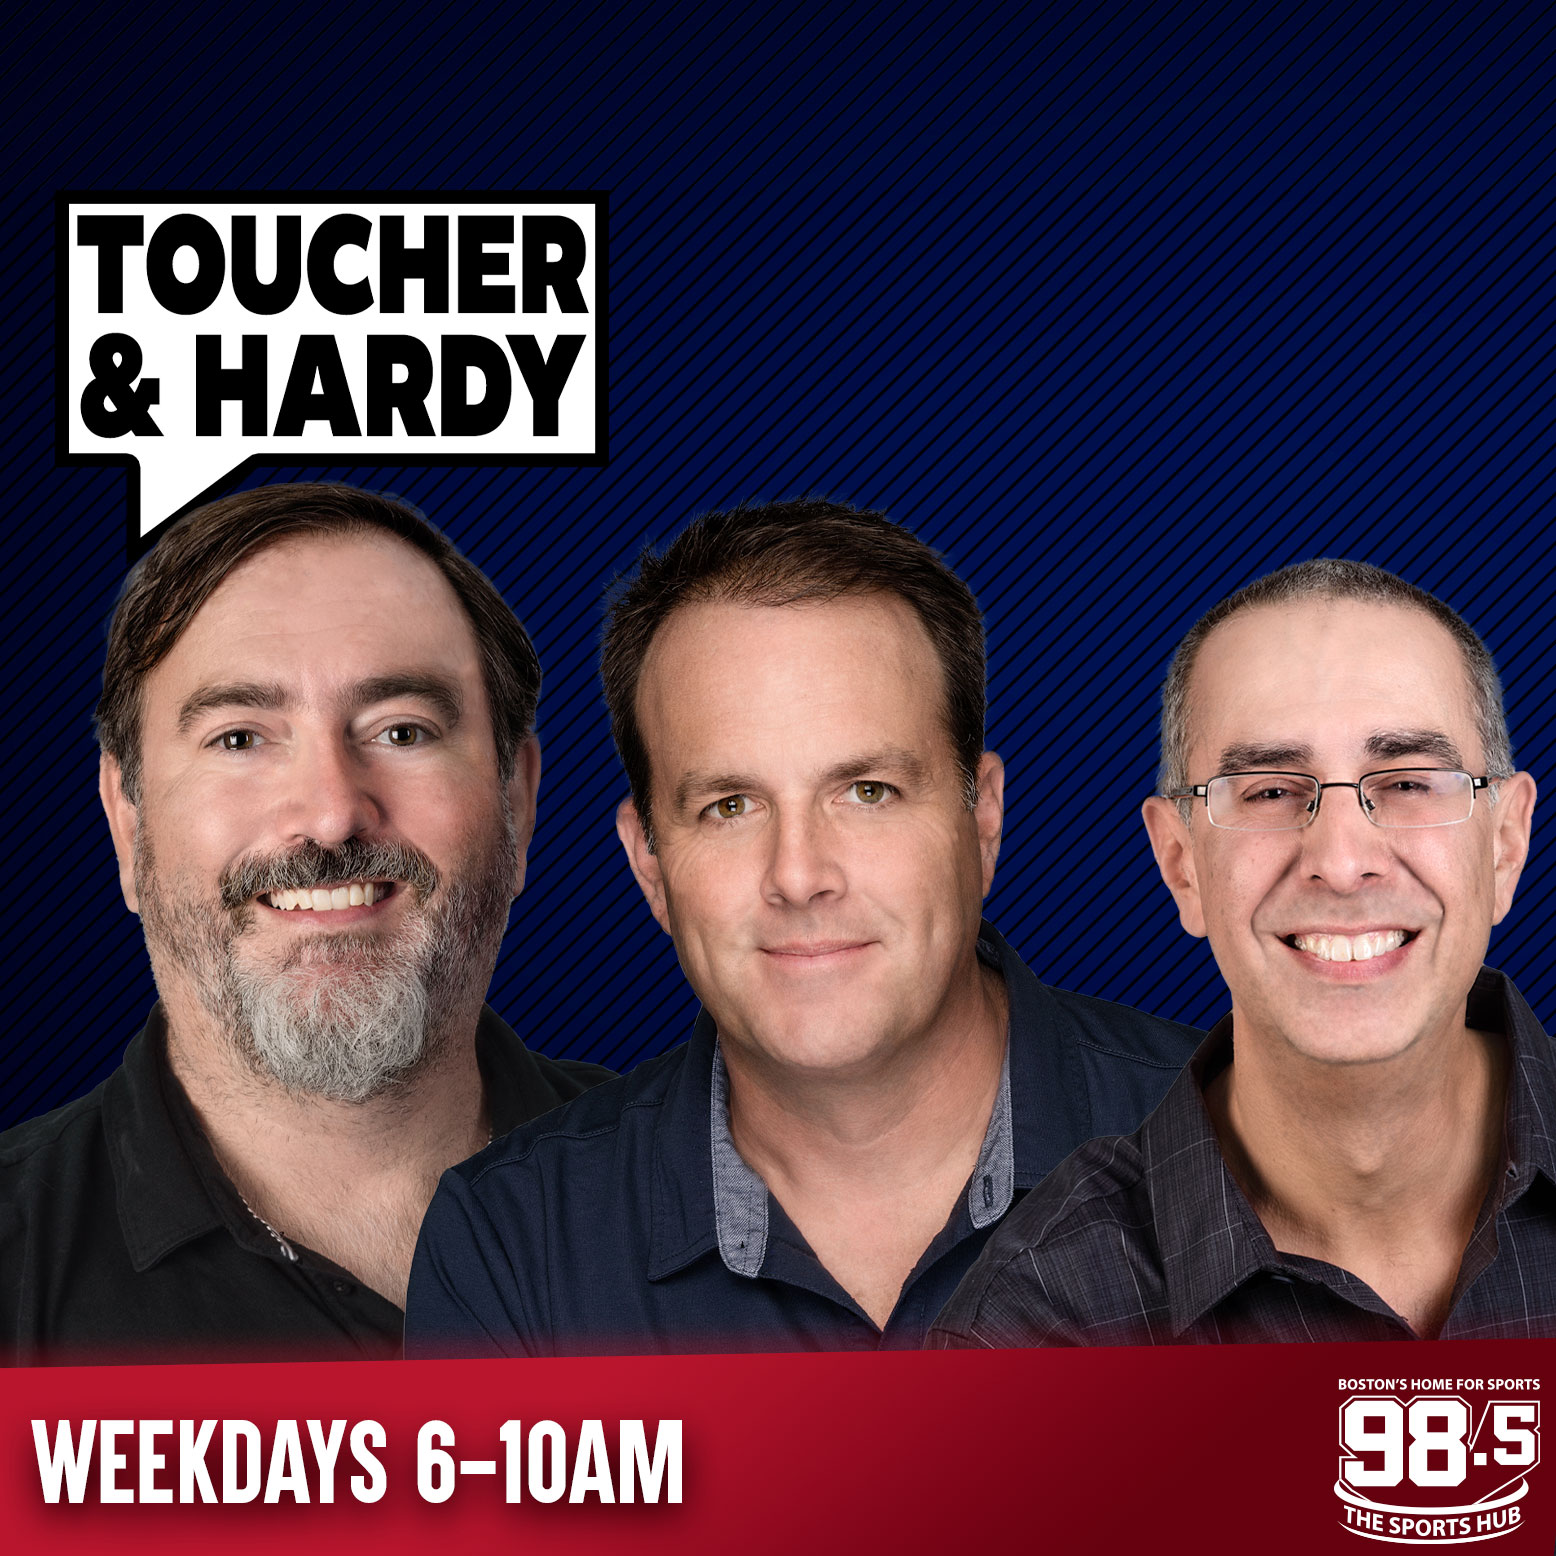 Chris Forsberg Joins the Show — Toucher & Hardy